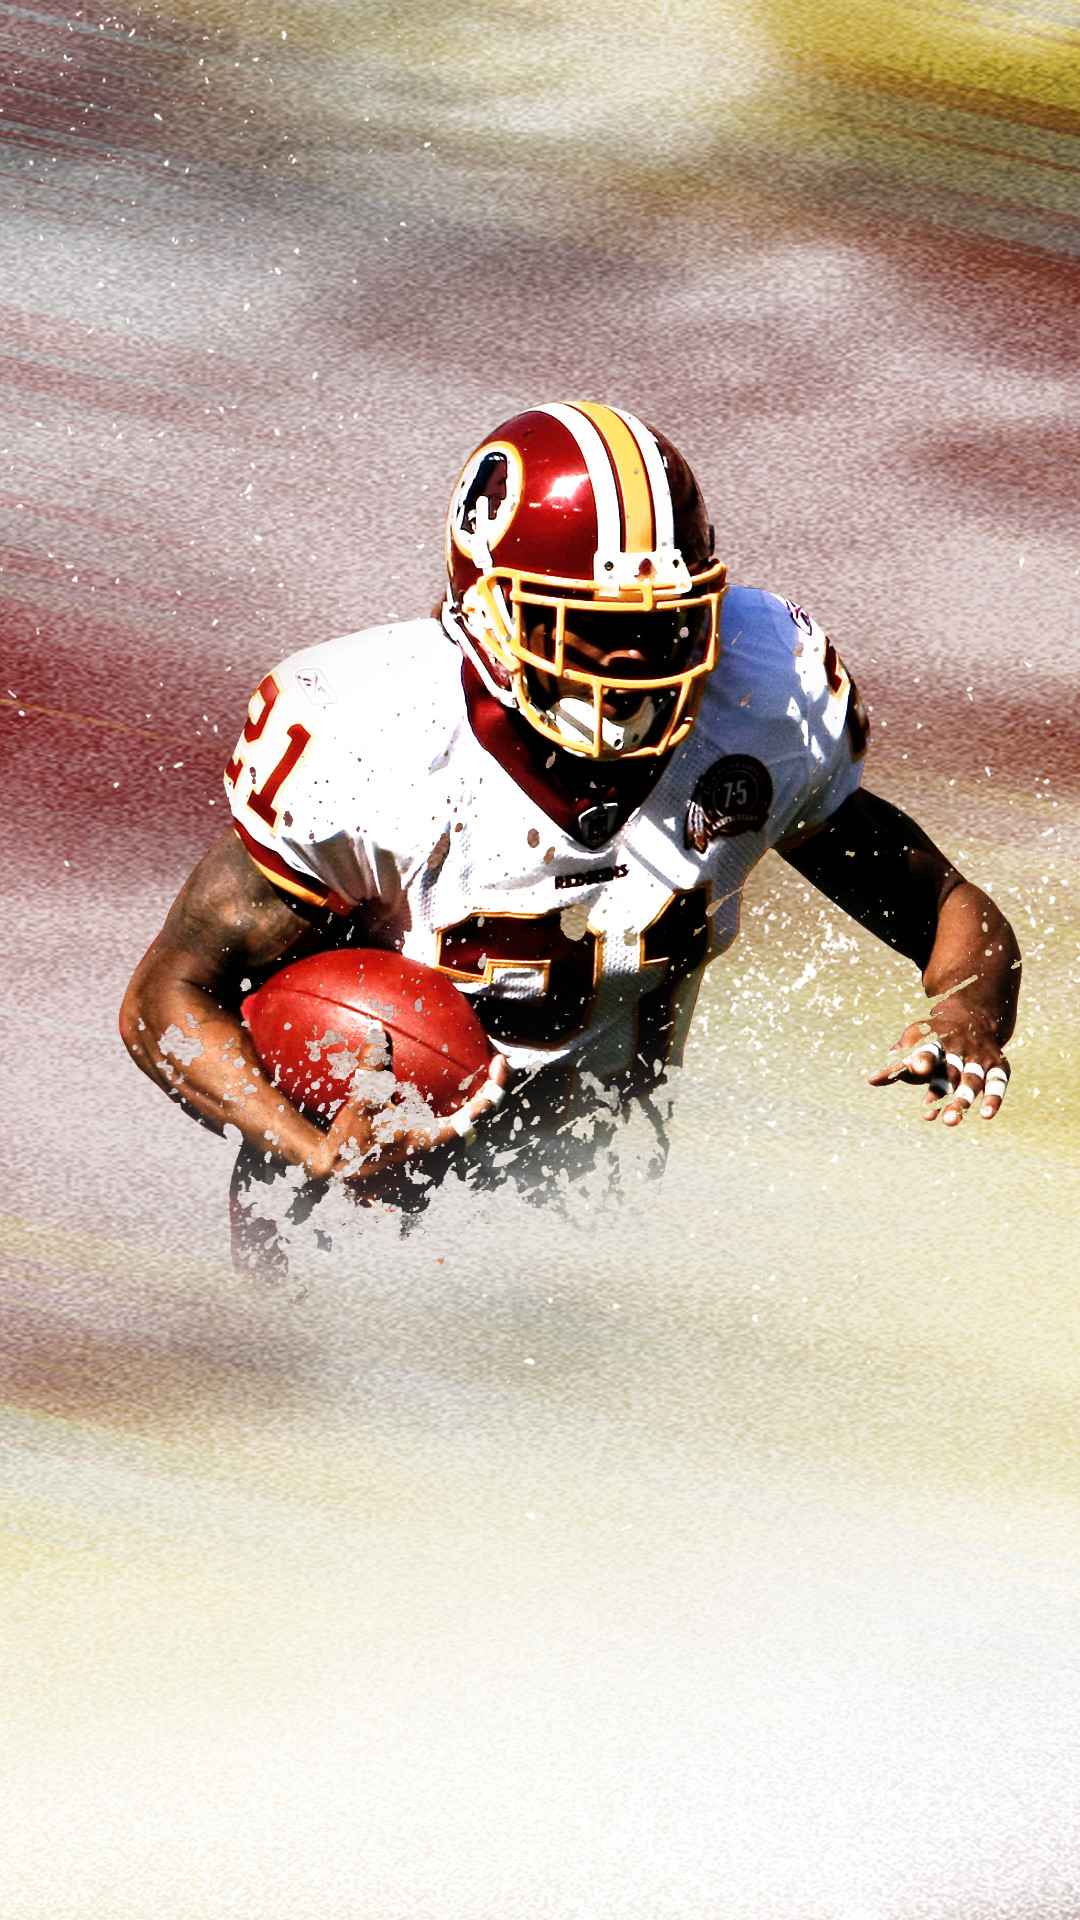 1080x1920 Made a Sean Taylor phone wallpaper for you guys, hope you enjoy it!